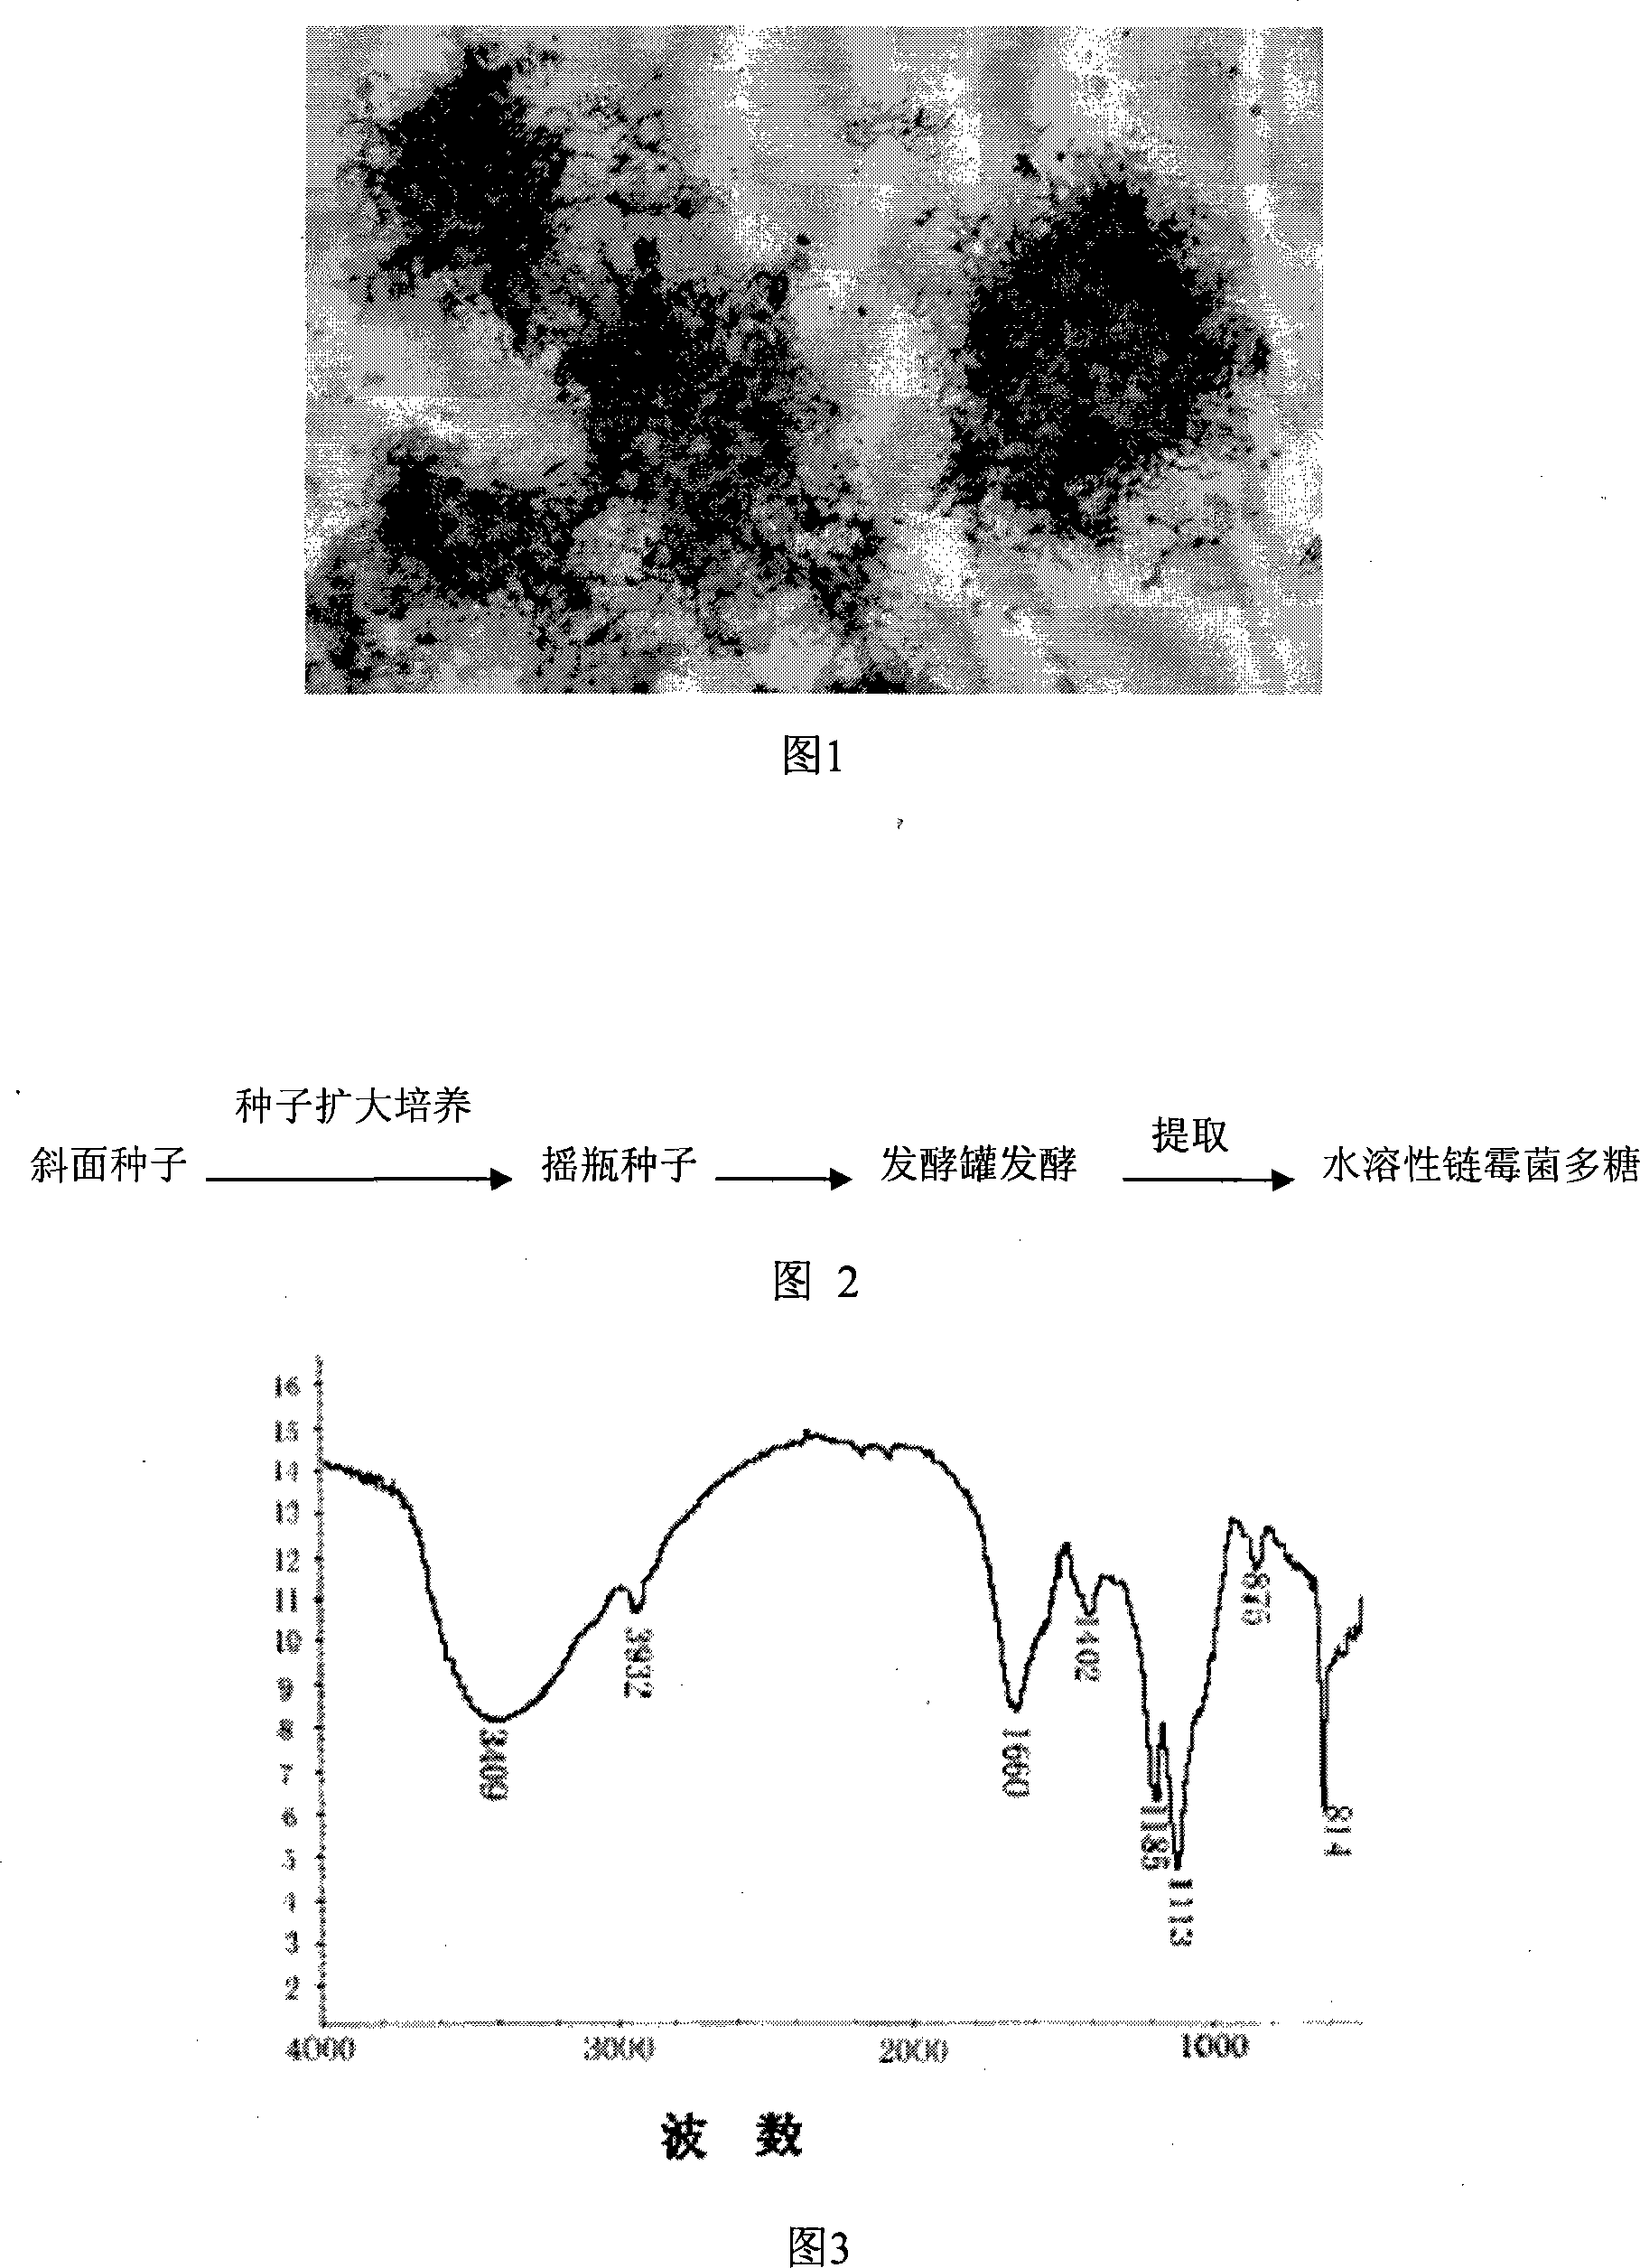 Water-soluble streptomycete polysaccharide and application thereof